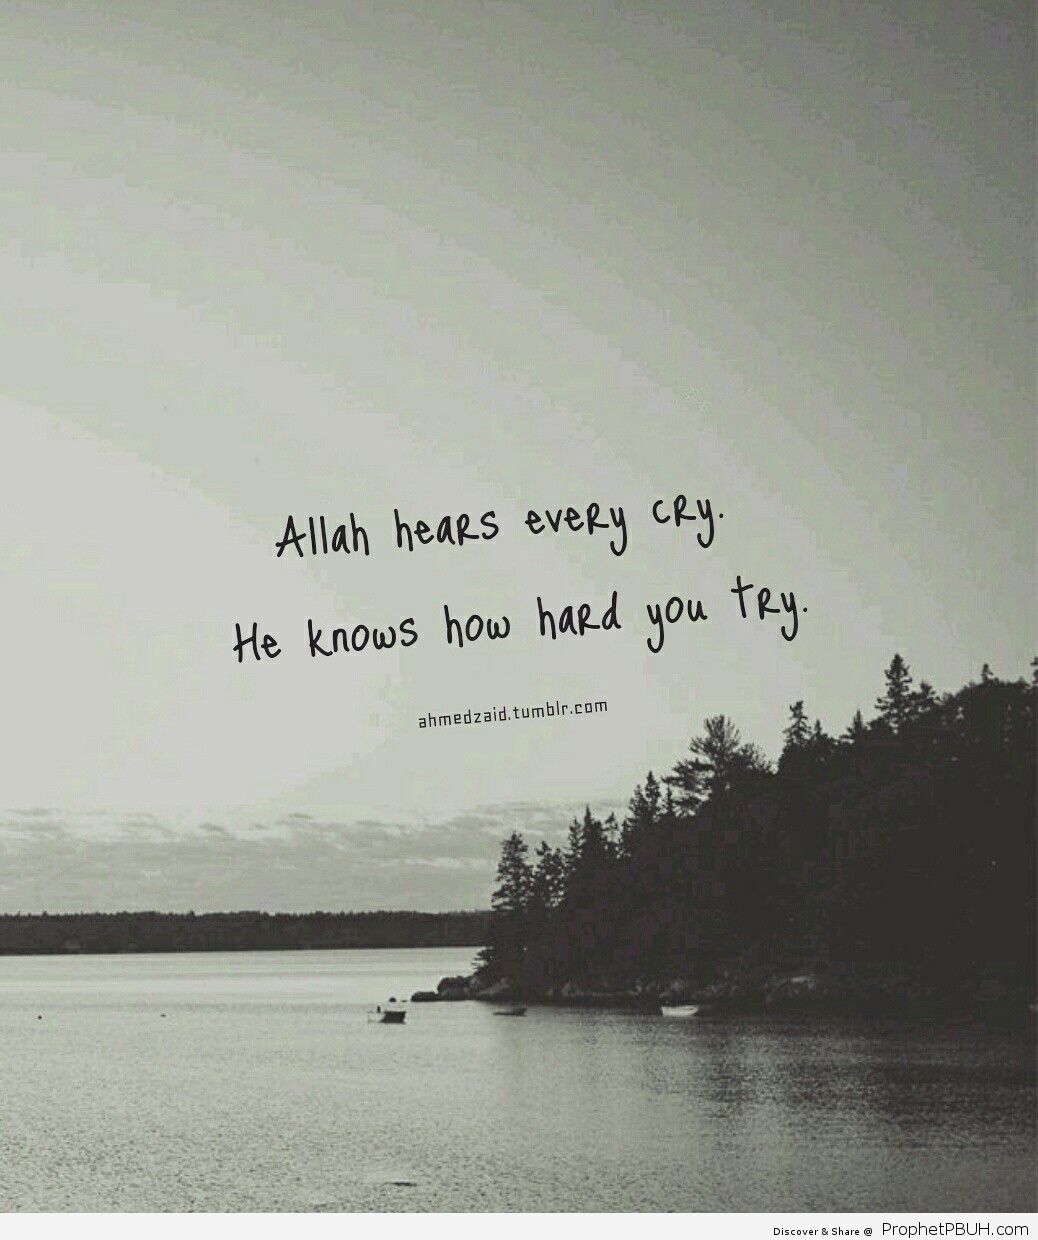 Indeed Allah knows you and sees you and cares about you more than you can imagine